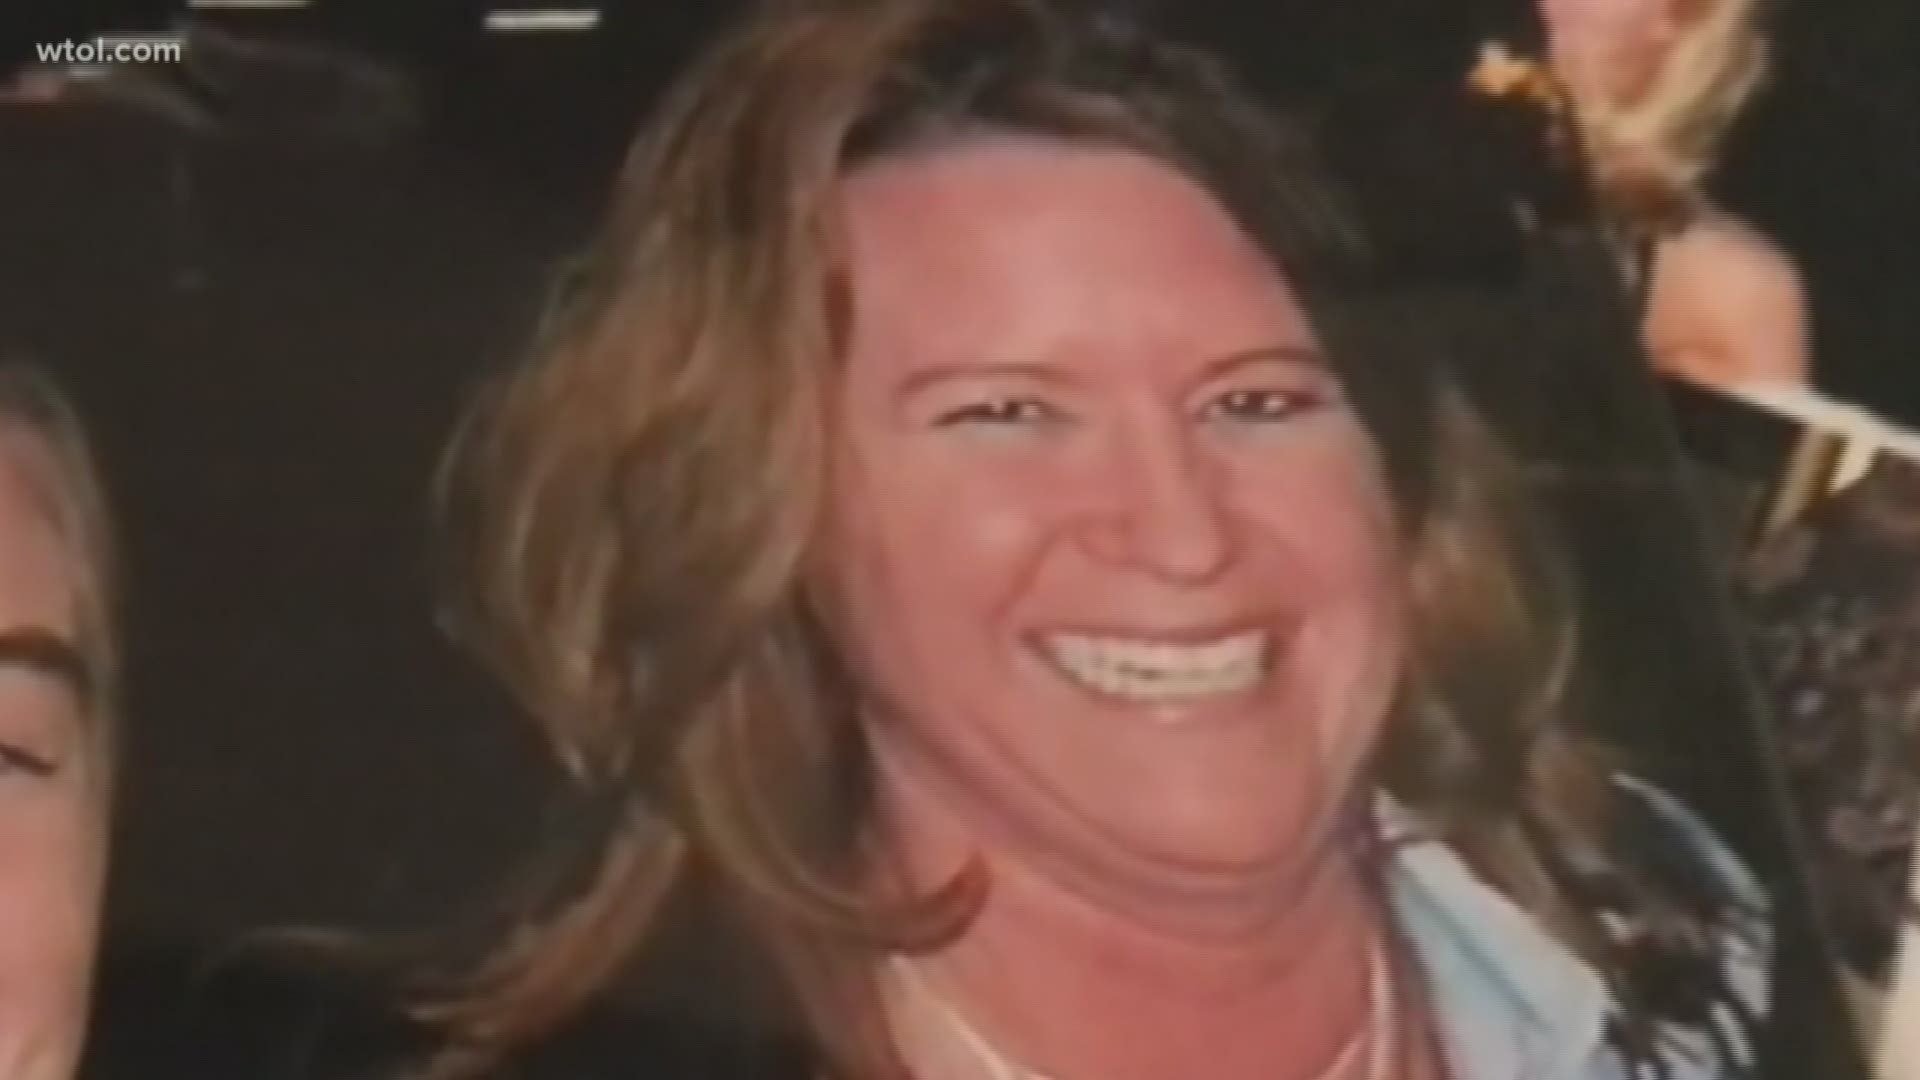 Toledo Police are asking anyone with information on Tammy Grogan's 2006 disappearance to contact them